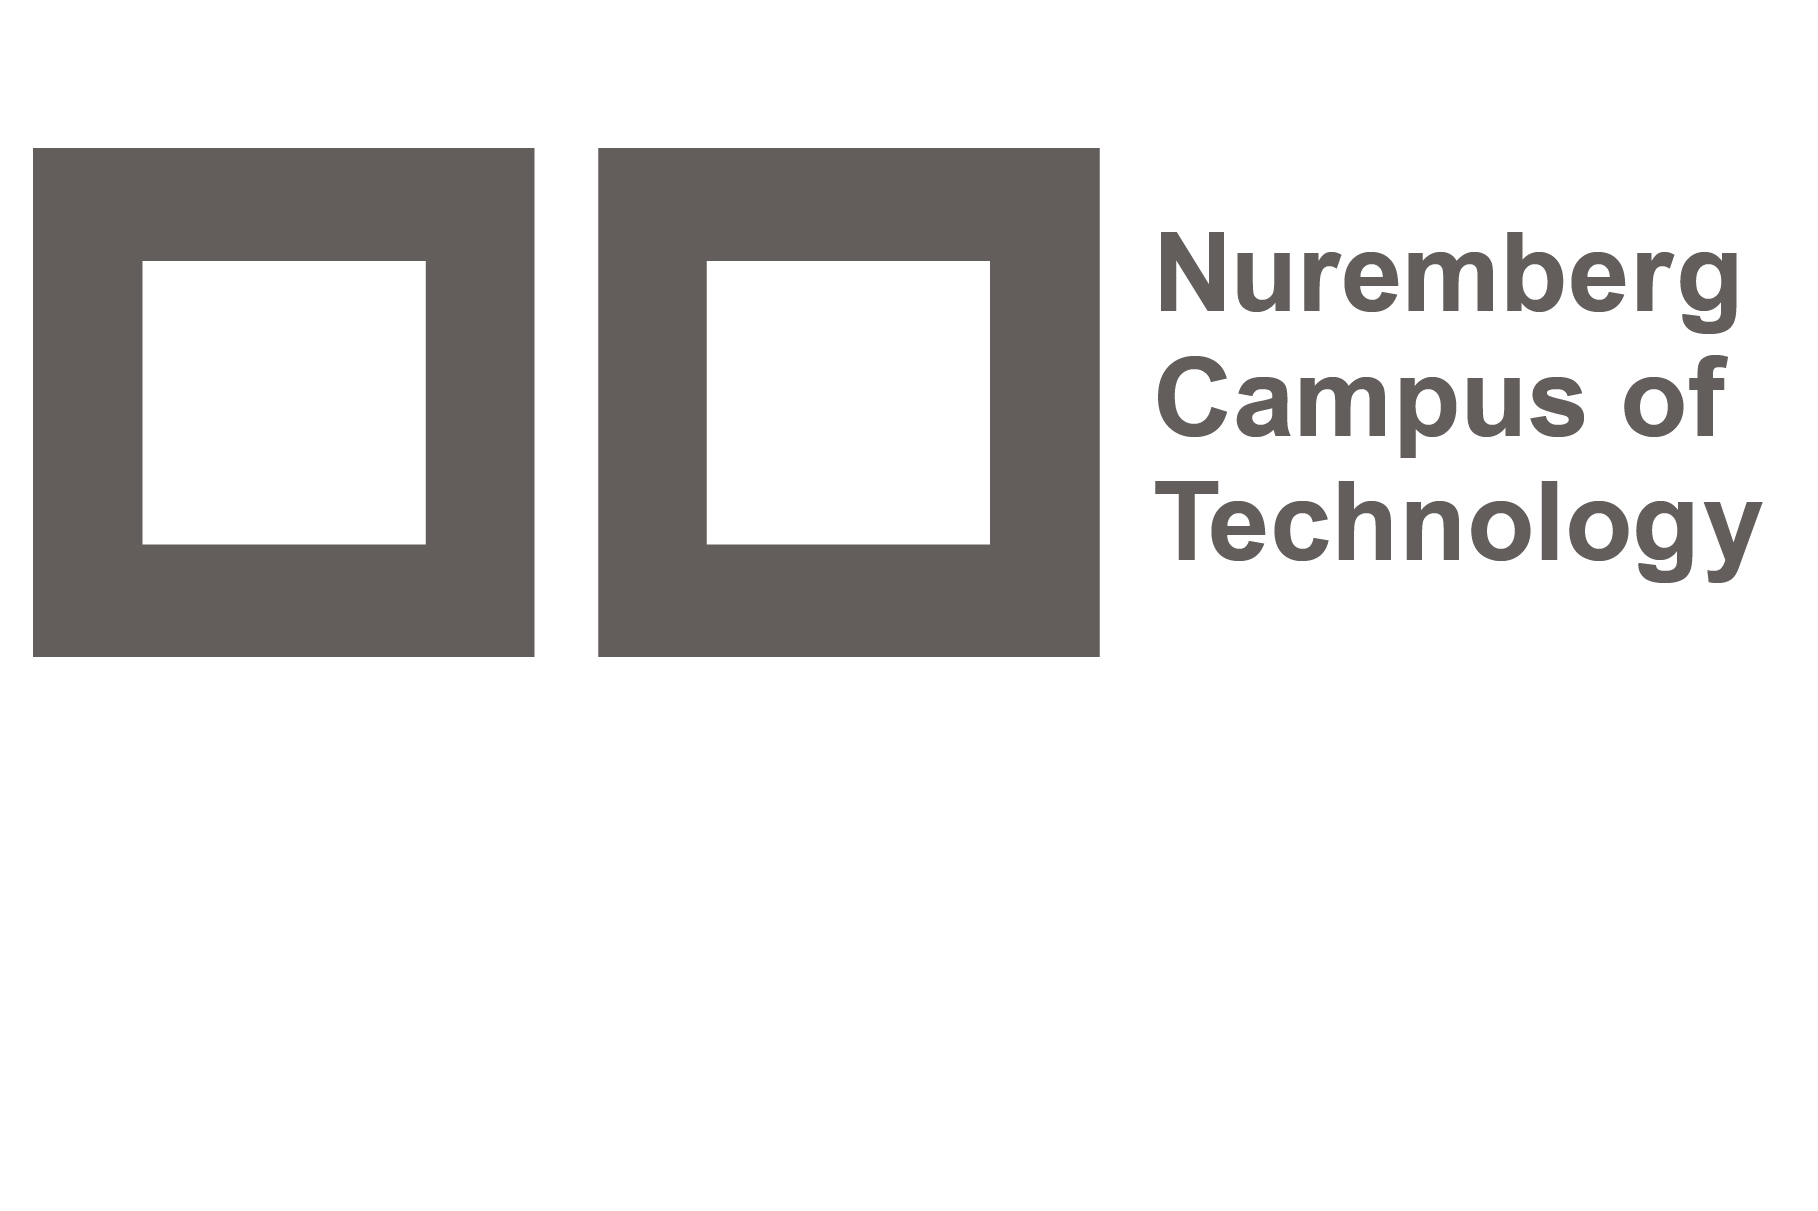 To the page:Nuremberg Campus of Technology